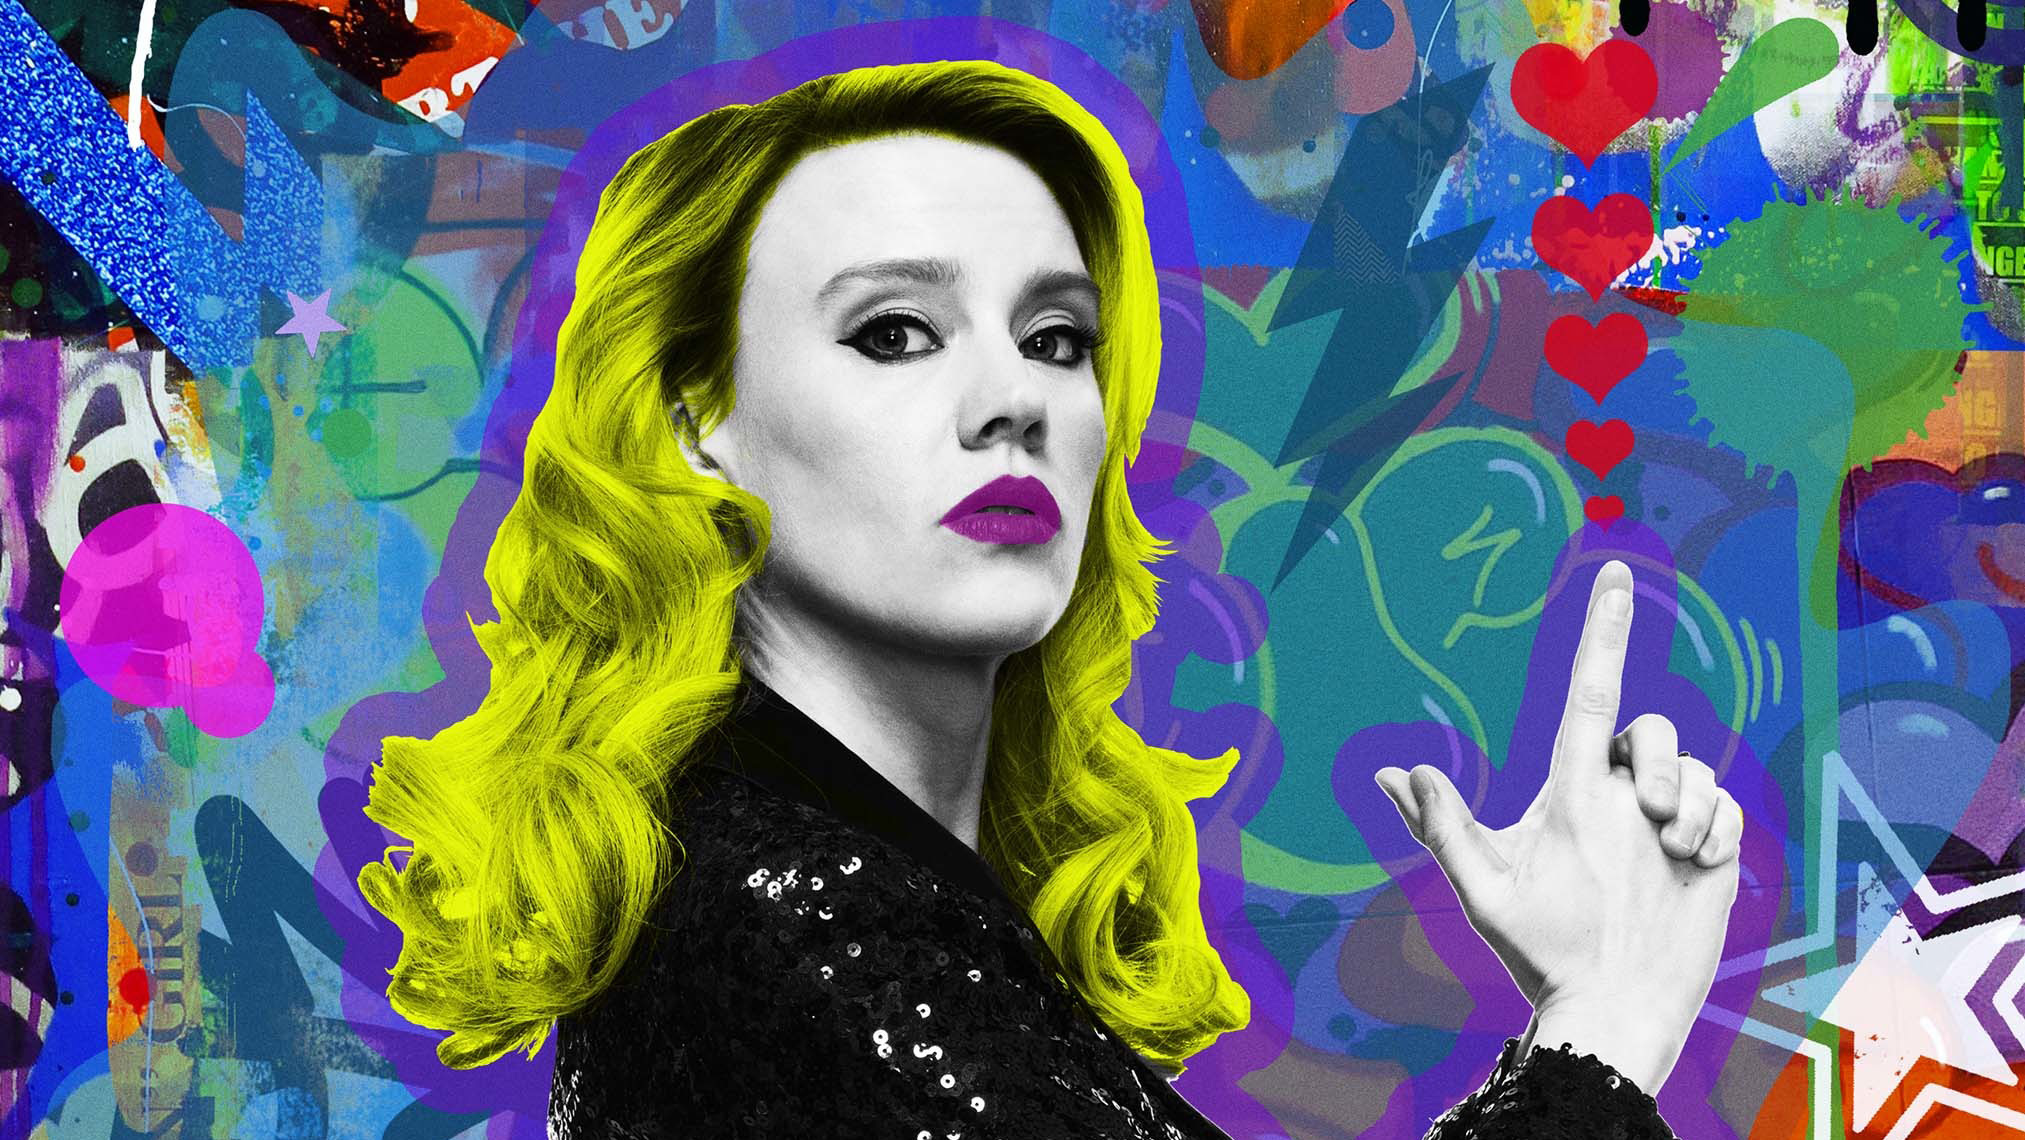 The Spy Who Dumped Me Kate Mckinnon 2018 Wallpapers